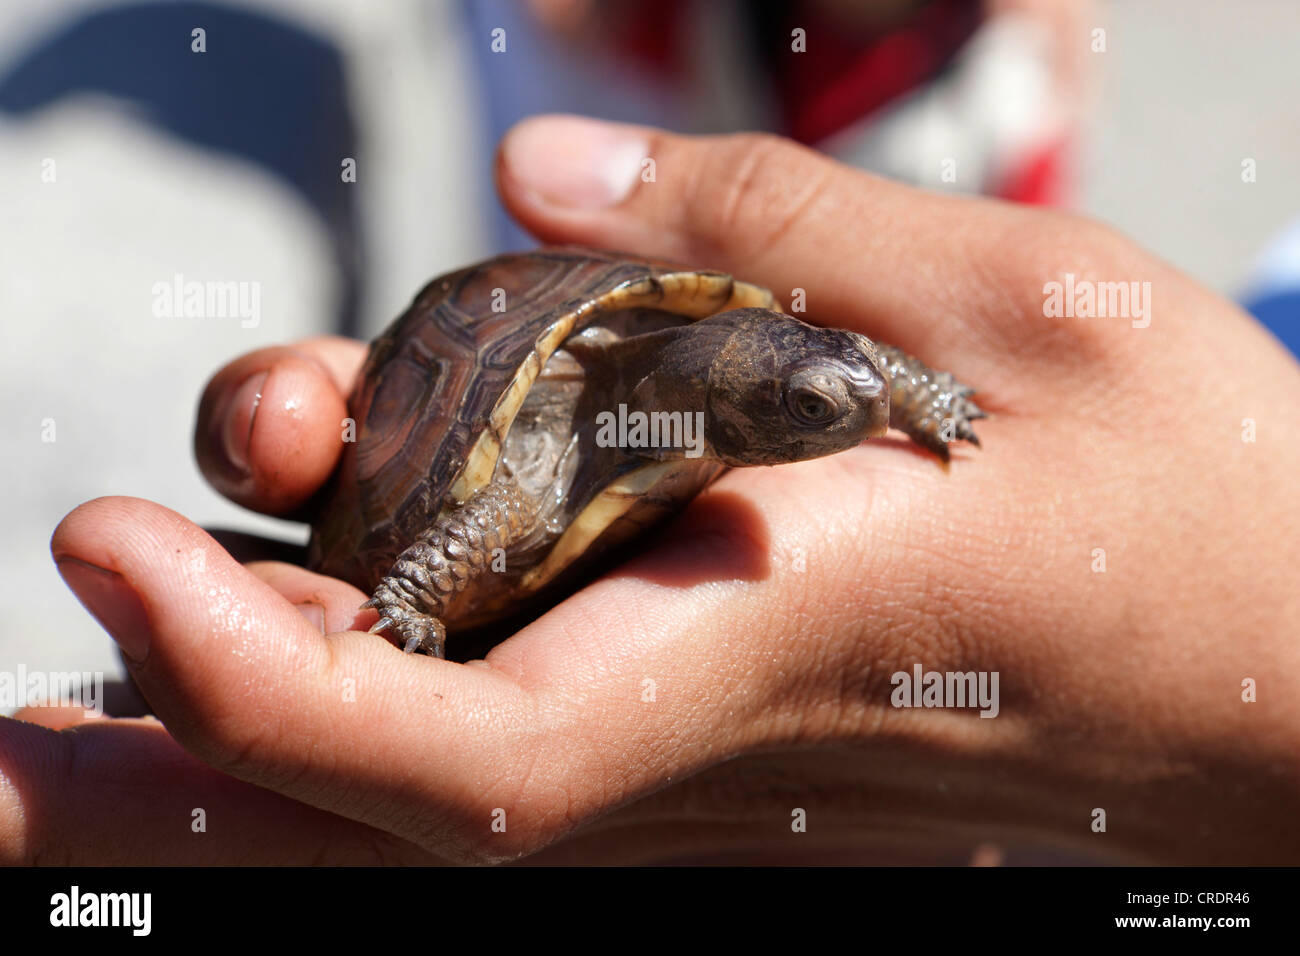 A boy holding a pet turtle in hand Stock Photo